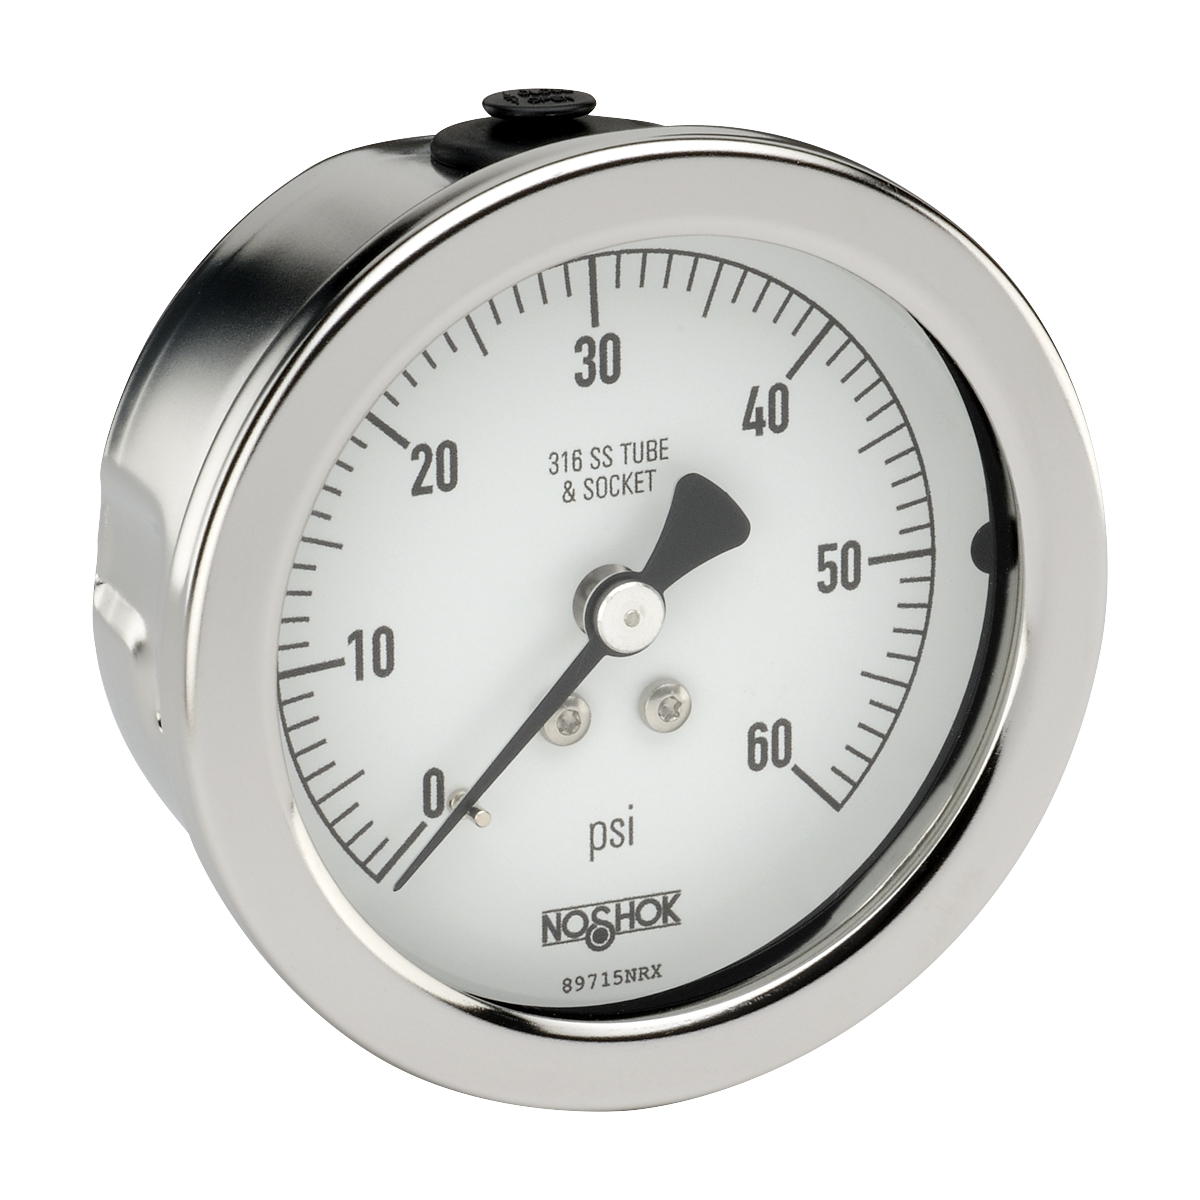 25-410-2000-psi/bar 400/500 Series All Stainless Steel Dry and Liquid Filled Pressure Gauges